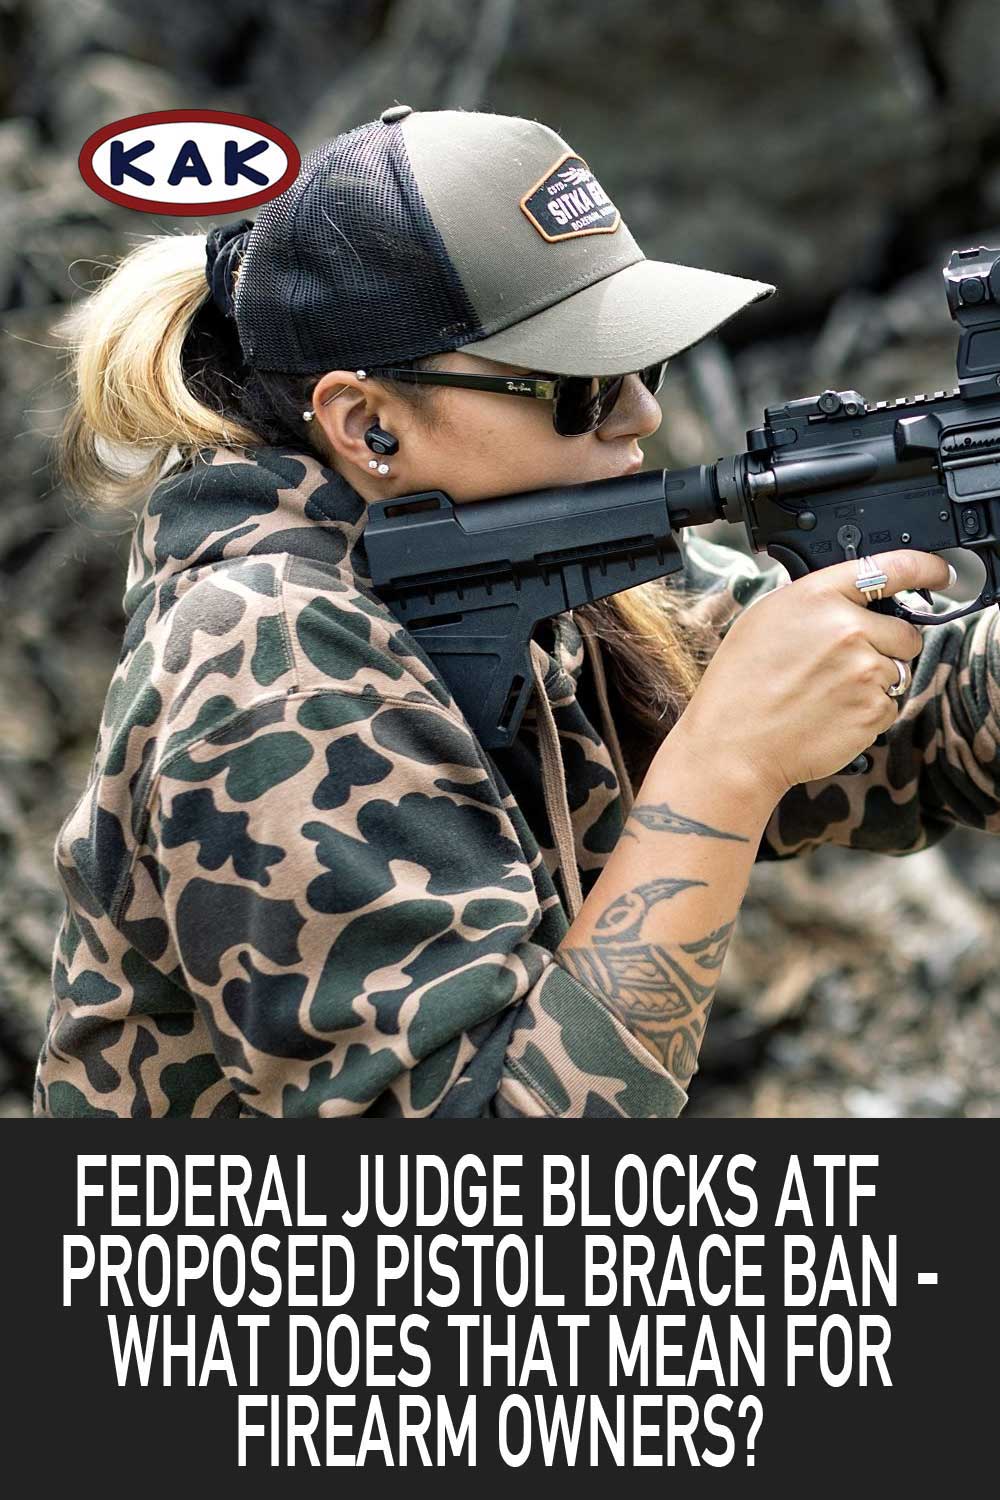 Breaking News: A Federal Judge Blocks ATF Proposed Pistol Brace Ban – What Does This Mean for Firearm Owners?